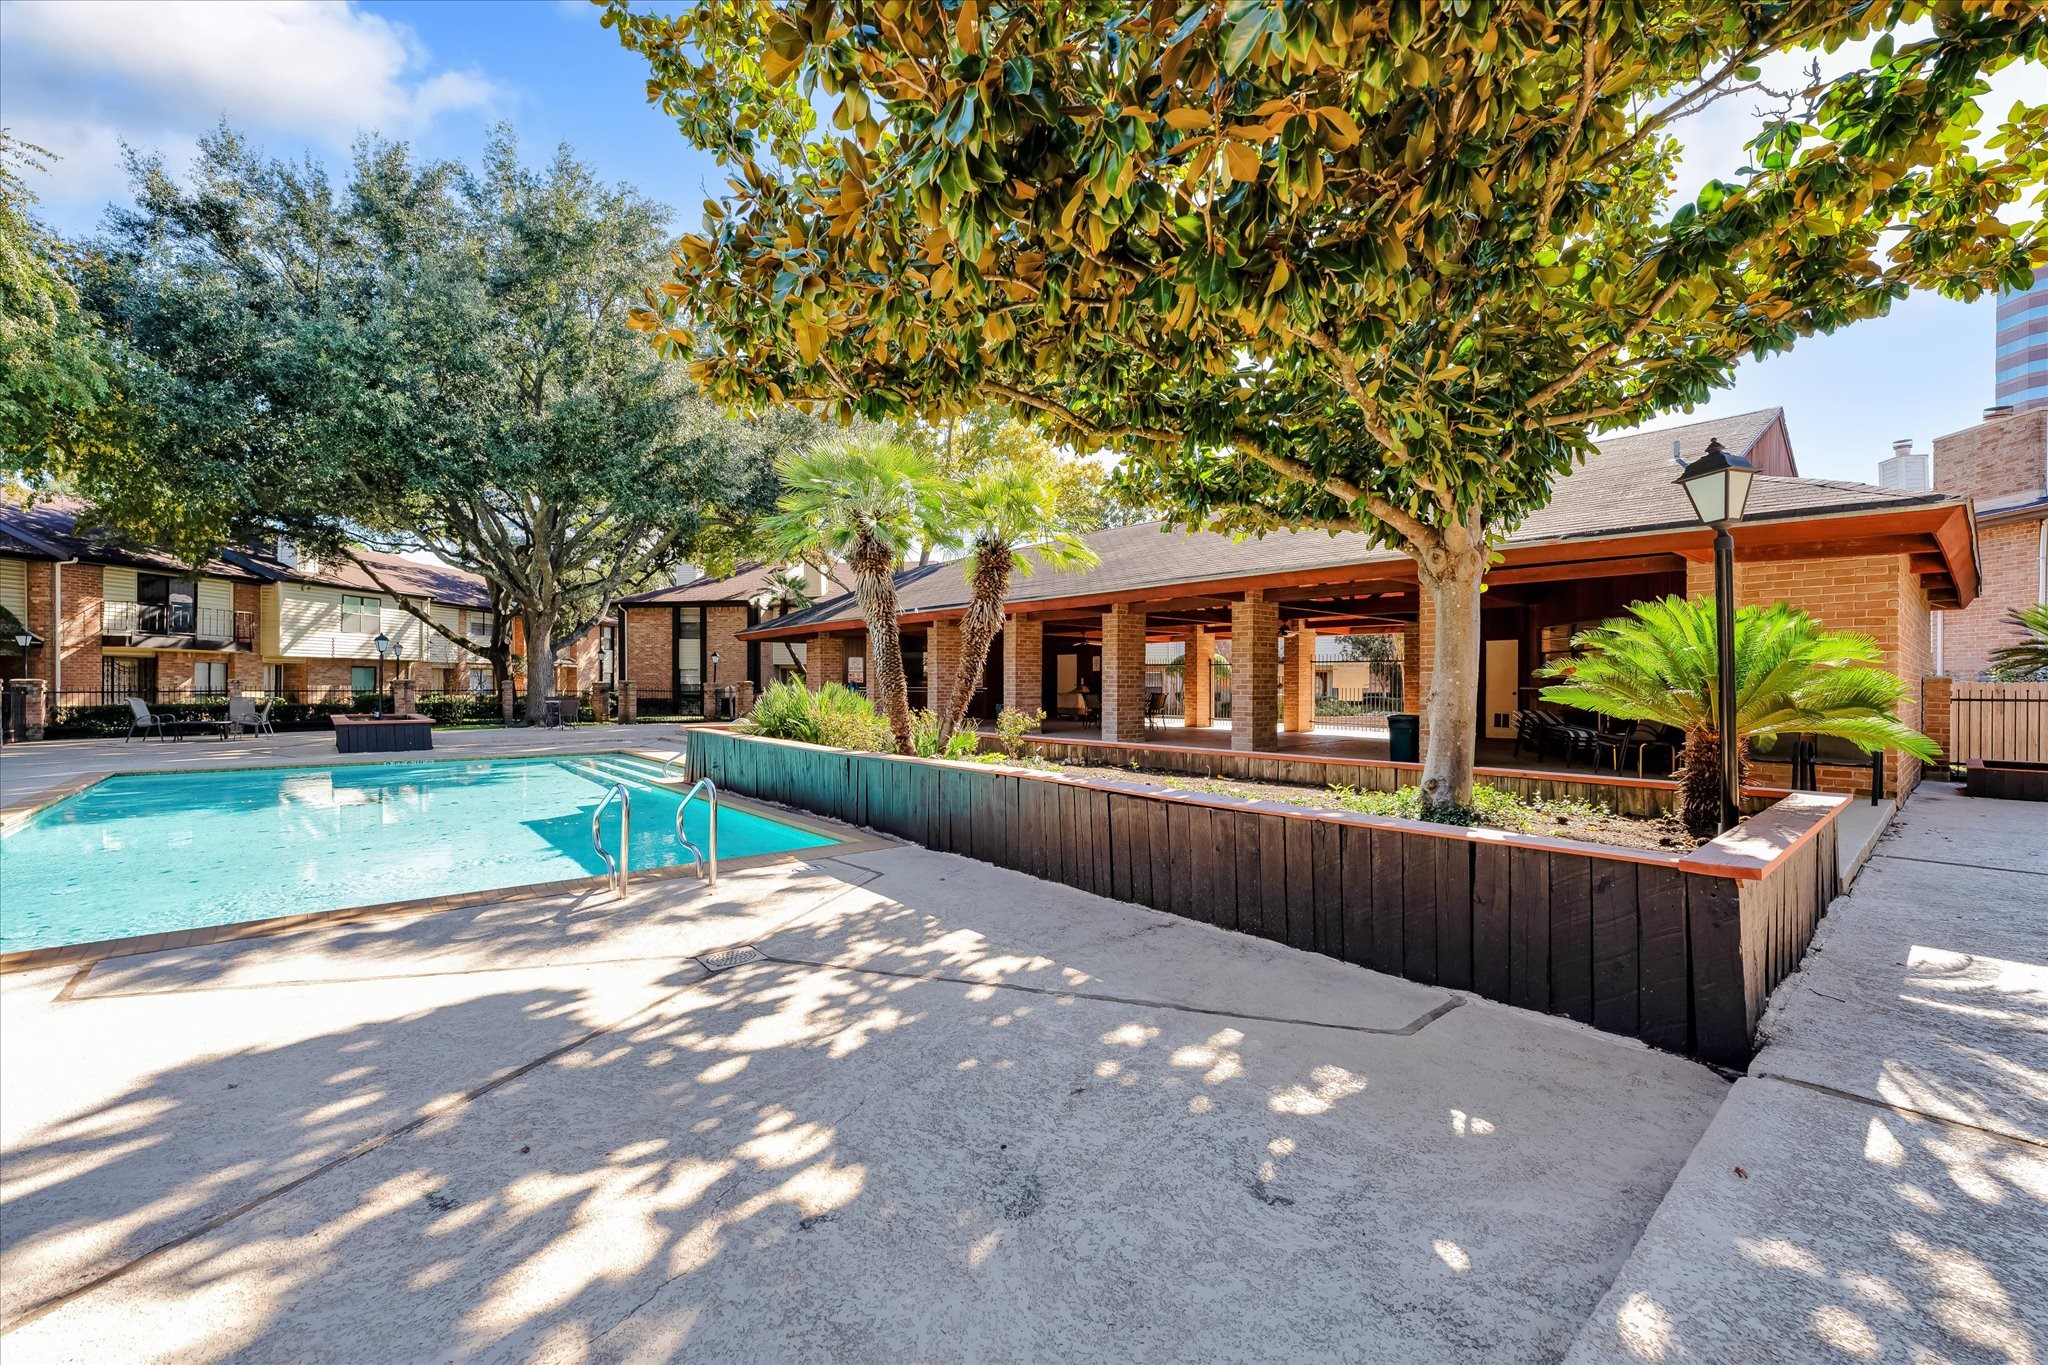 With huge mature trees all around, this limited access pool is perfect for residents to unwind and relax, enjoy your new favorite read, or spend some quality time with loved ones.